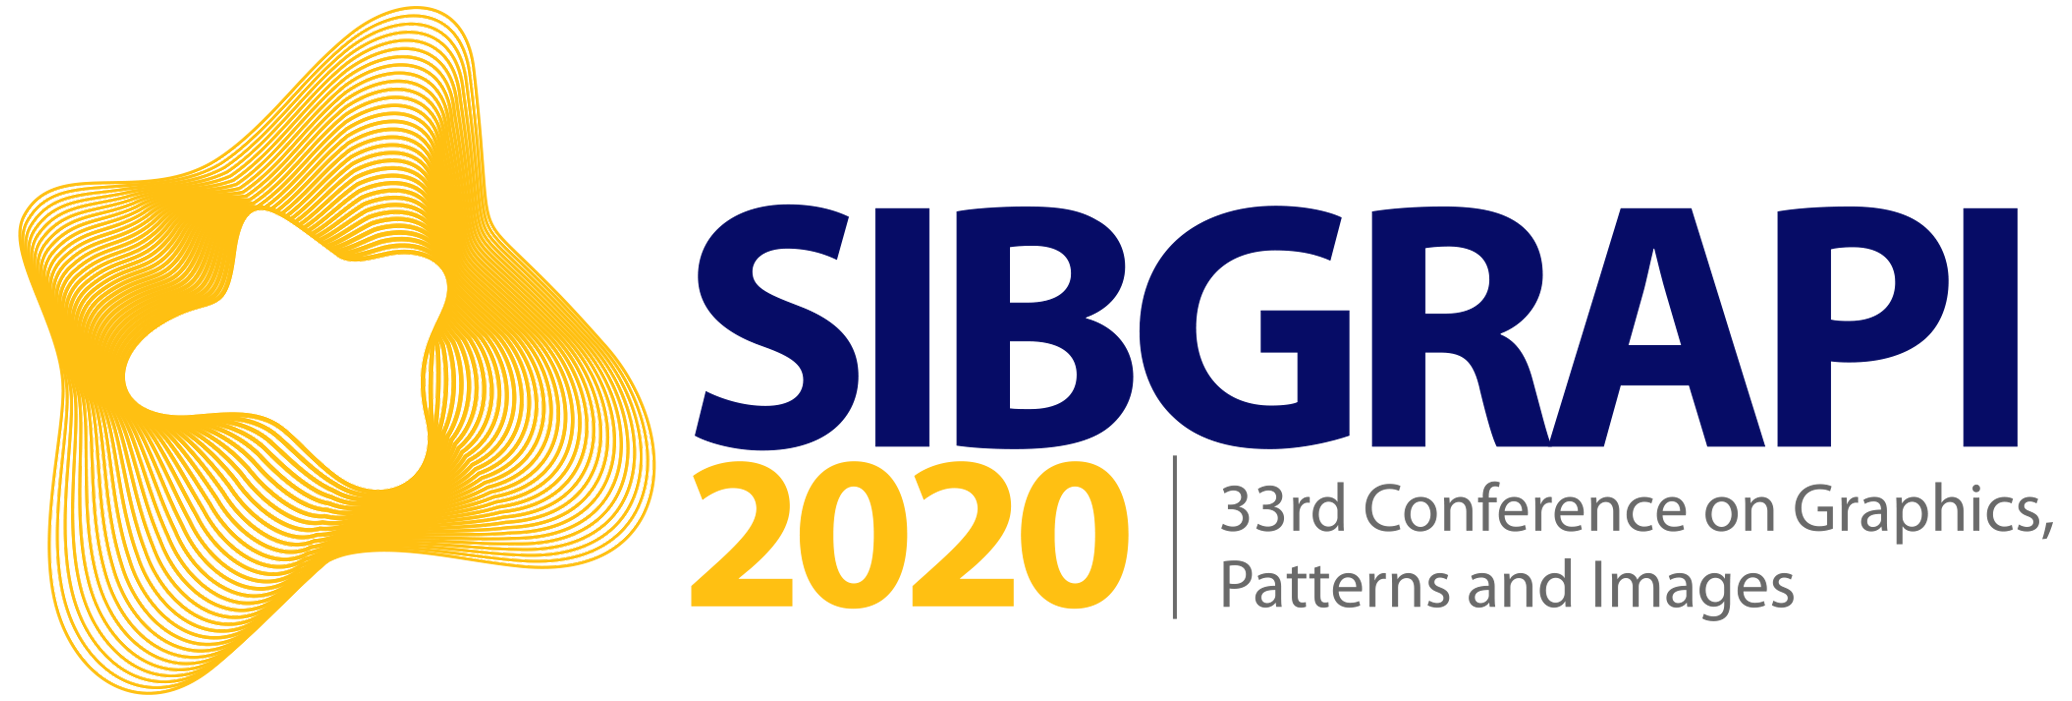 SIBGRAPI 2020 – 33rd Conference on Graphics, Patterns and Images